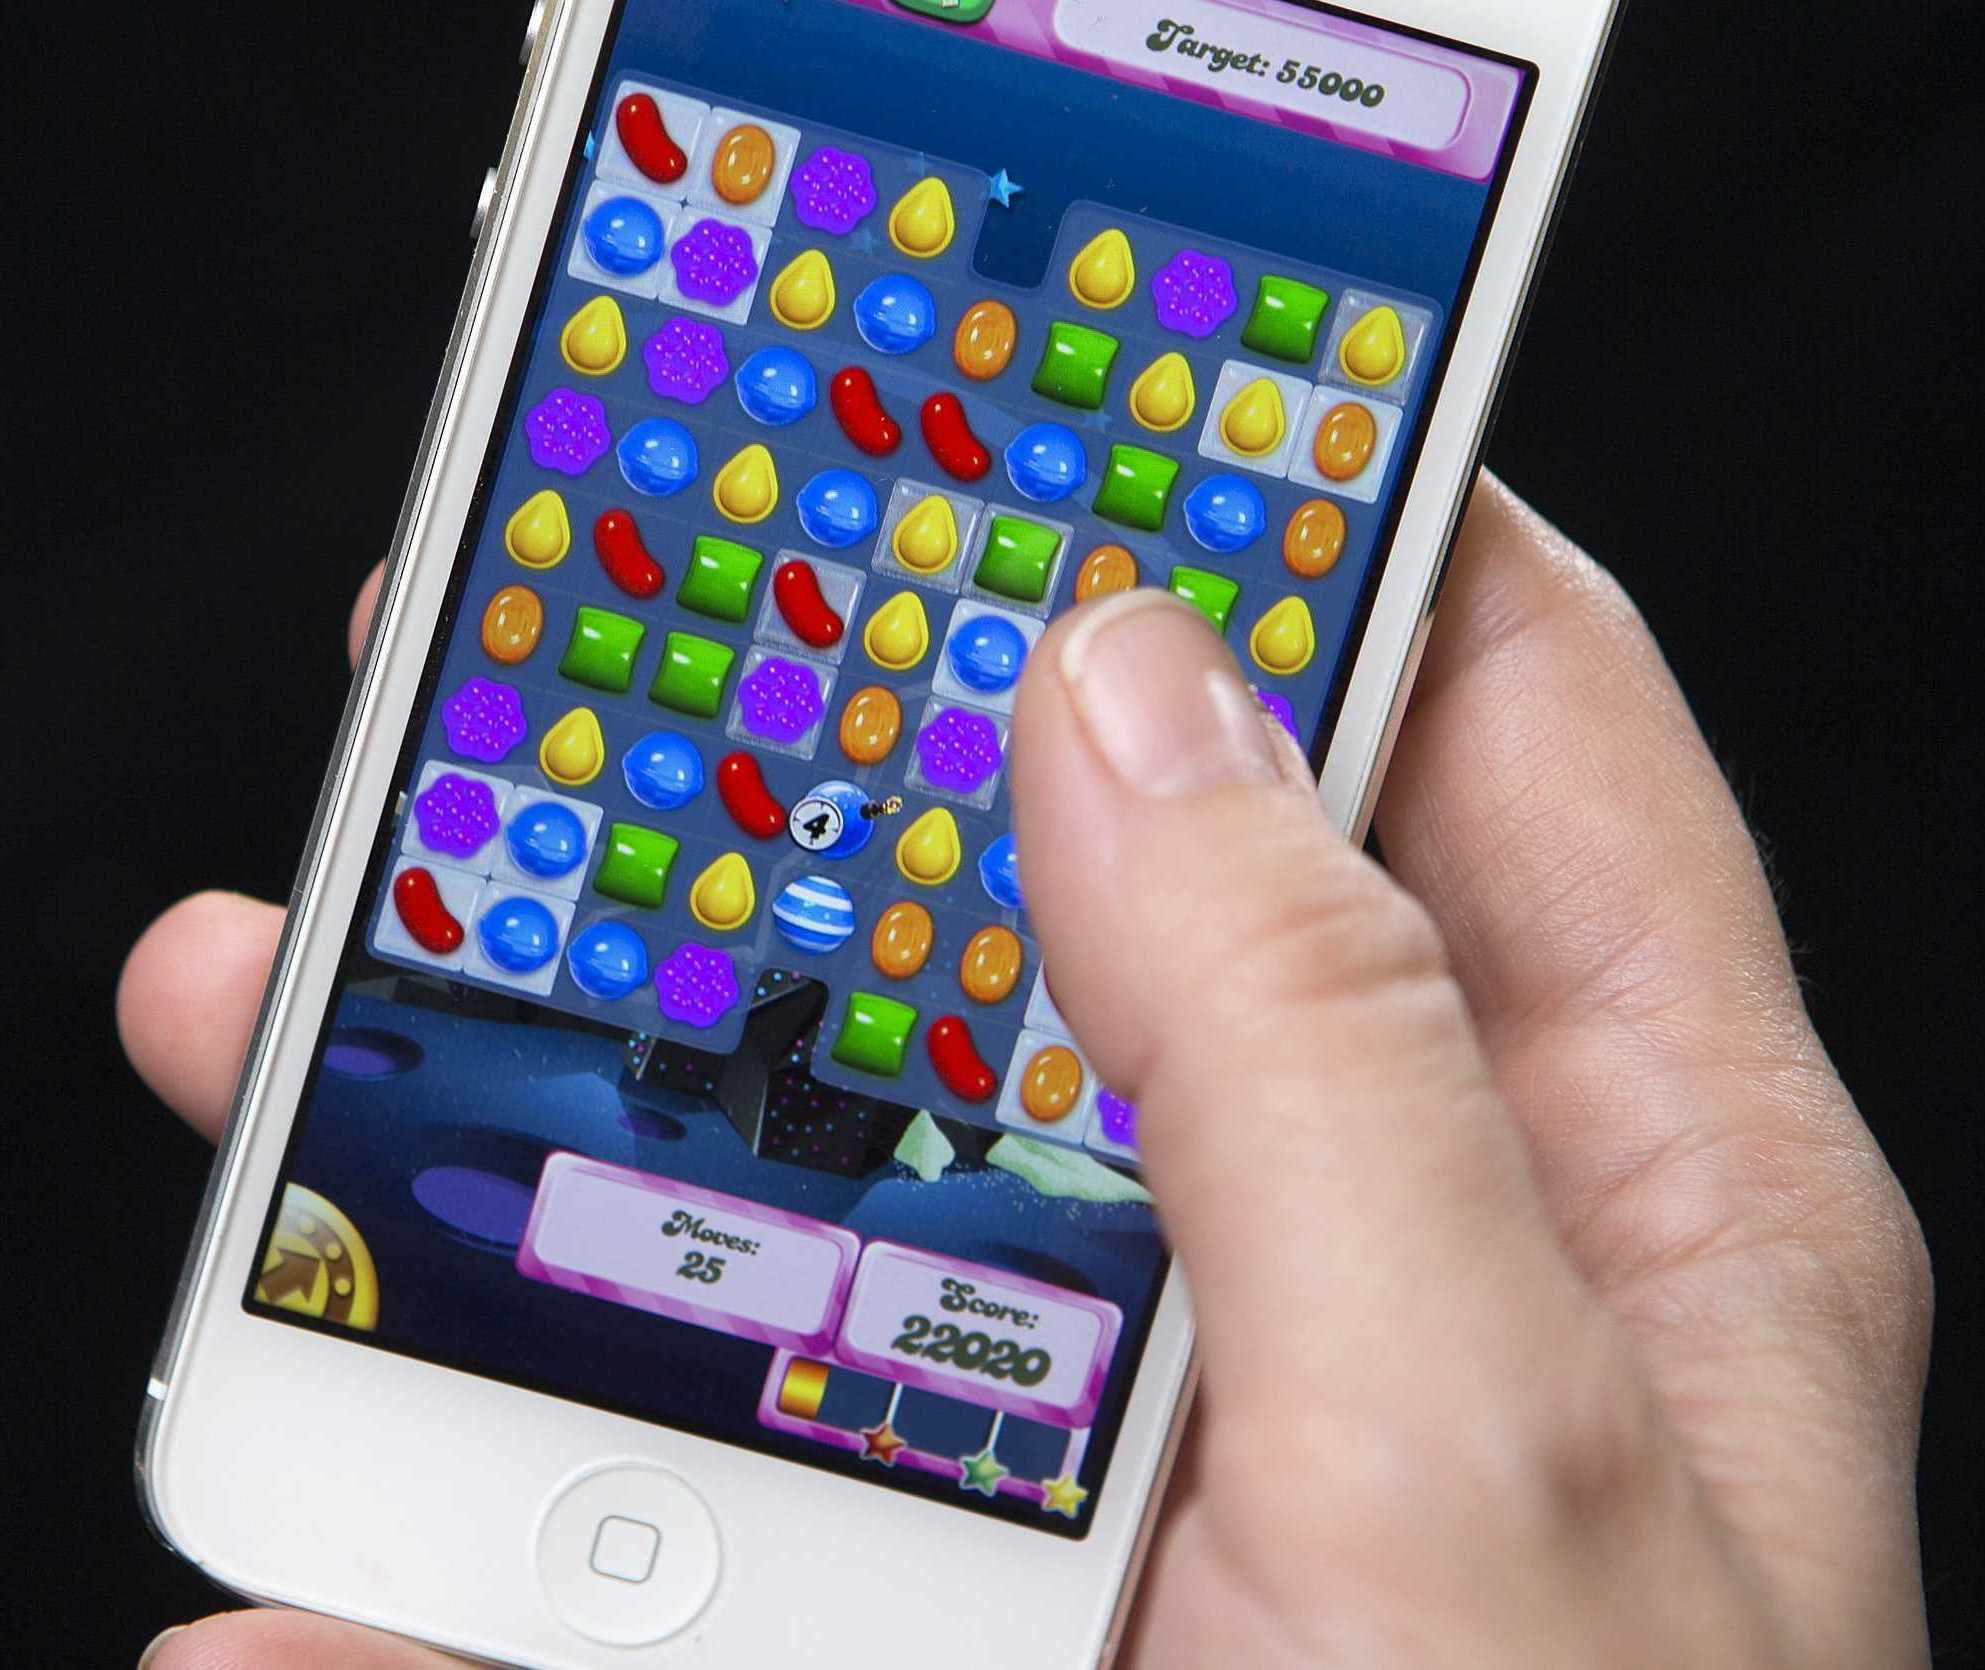 a-british-mp-admitted-to-playing-candy-crush-for-hours-during-a-pensions-meeting.jpg